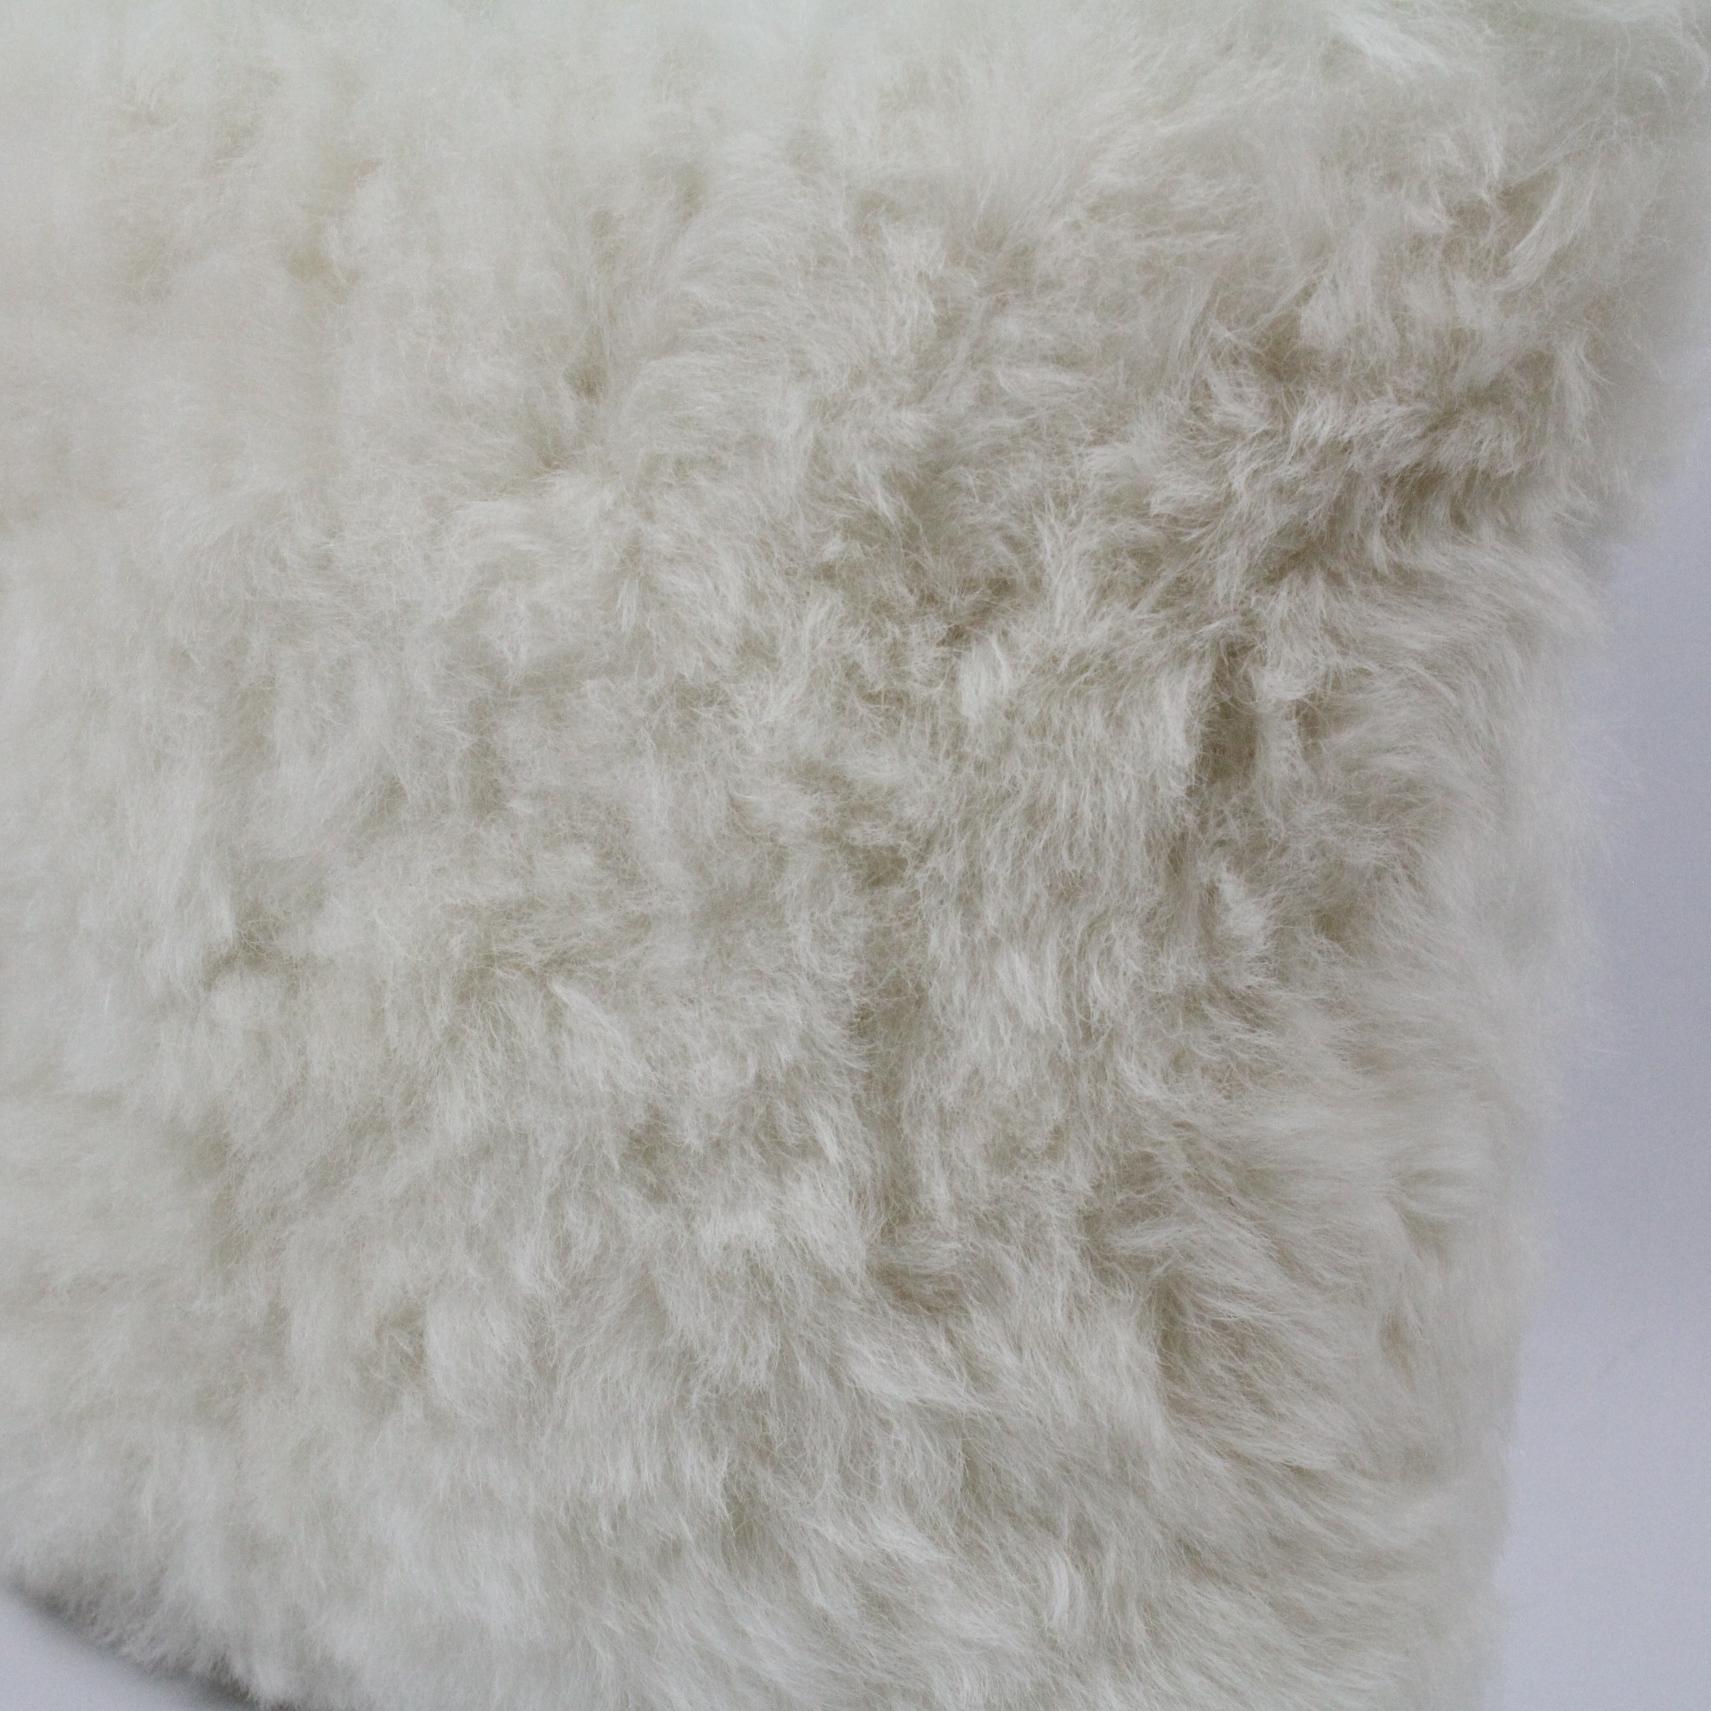 Natural white sheepskin pillow create an atmosphere of luxurious comfort layering a bed or sofa with this alluring, natural white sheepskin pillow. Made from the finest Icelandic sheepskin this charming and endearing square sheepskin pillow,